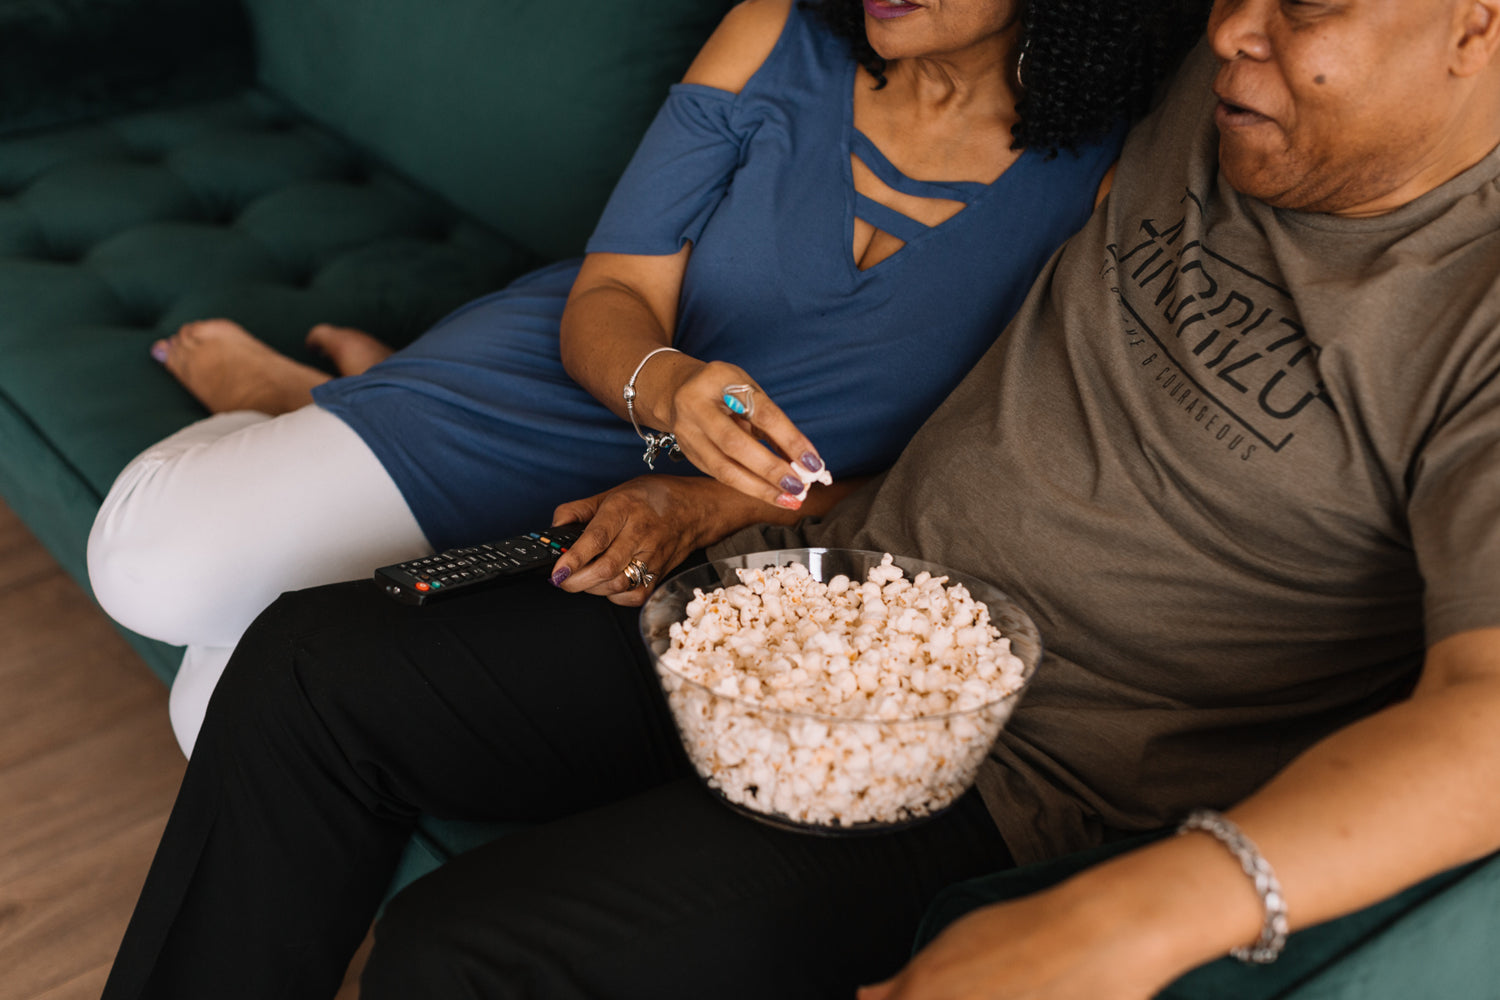 A Man And Woman On A Couch With Bowl Of Popcorn In The Man's Lap